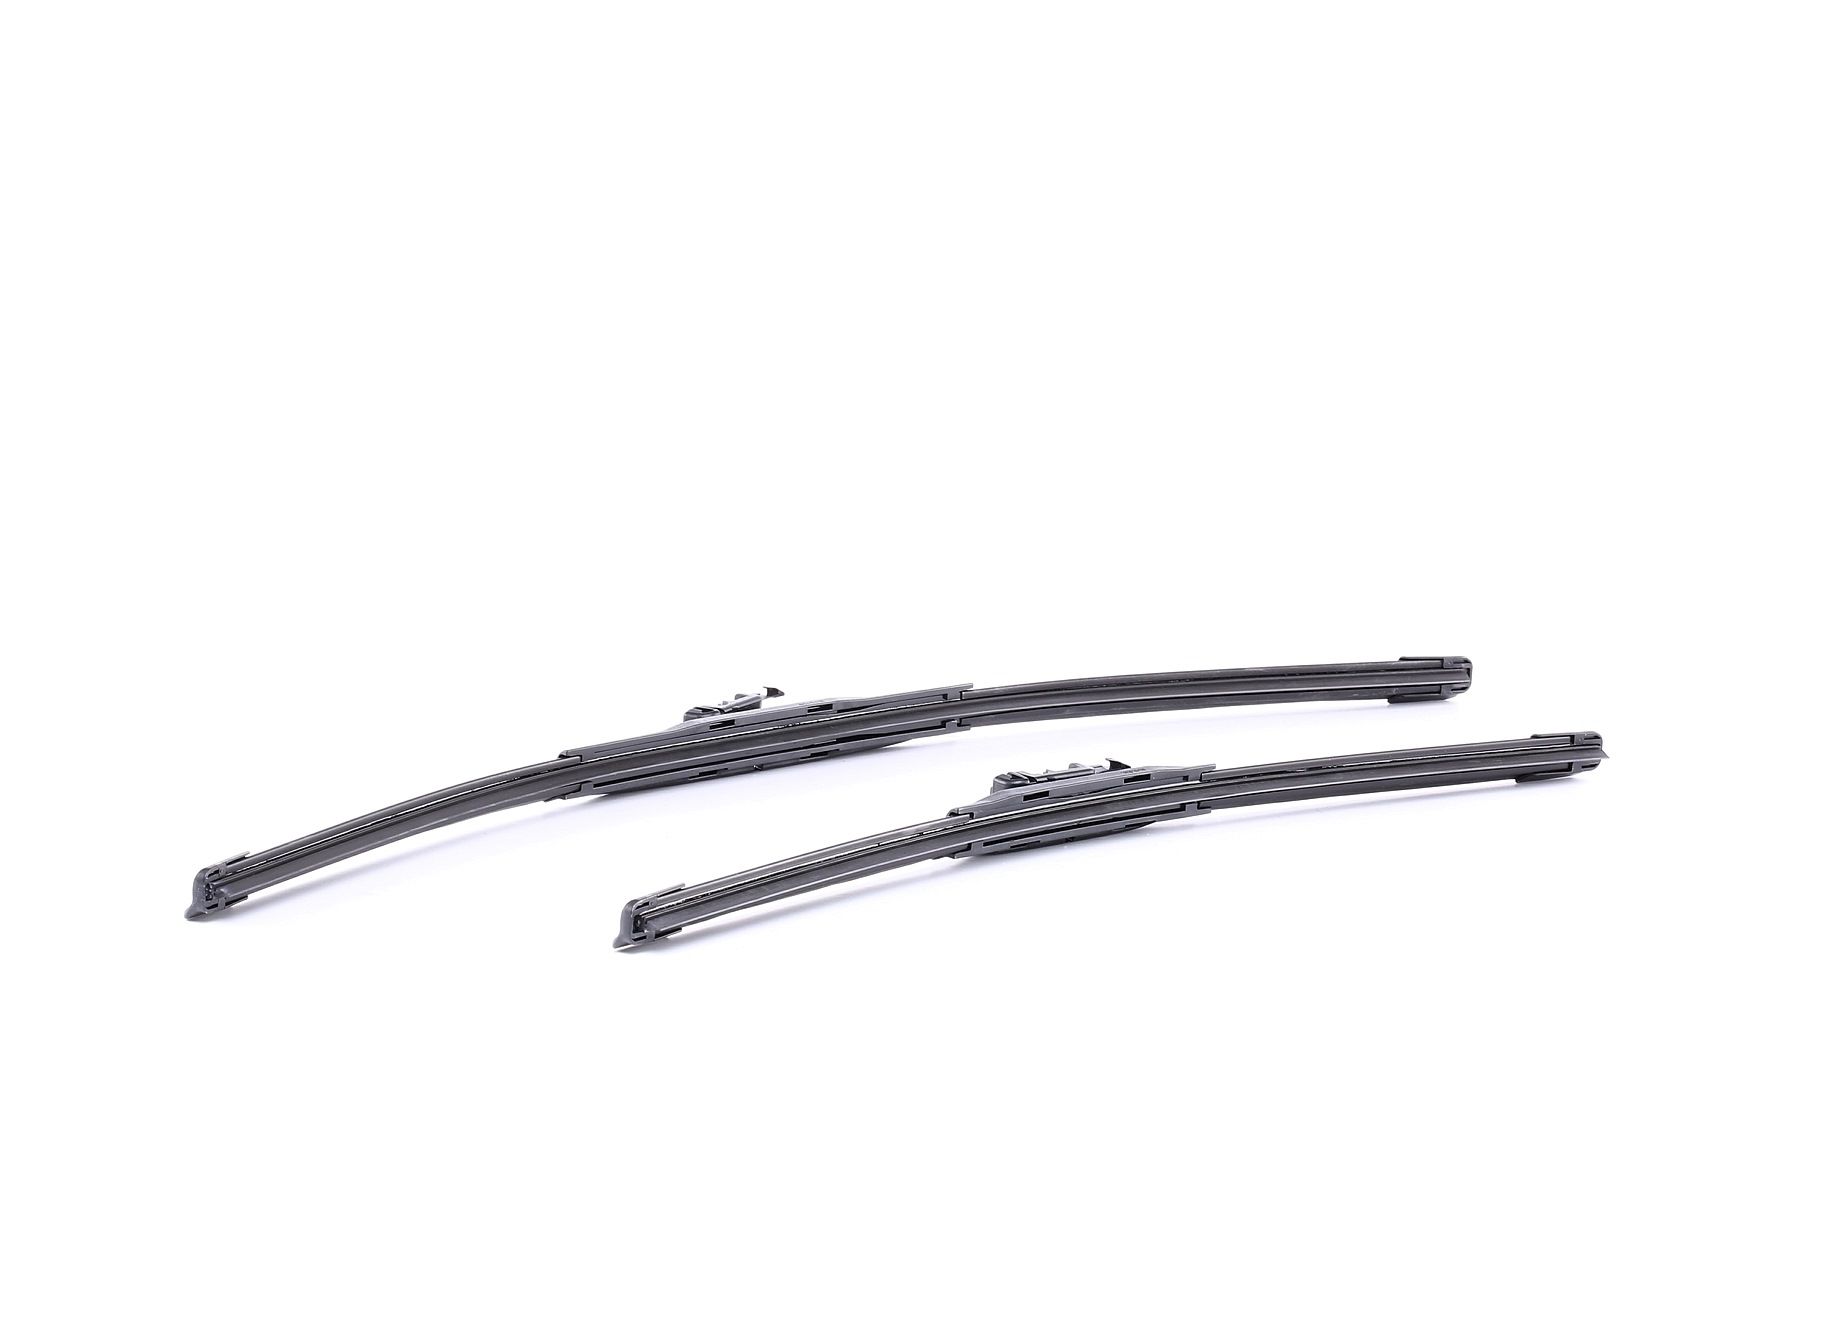 BMW 2 Series Window wipers 13203628 Continental 2800011126280 online buy